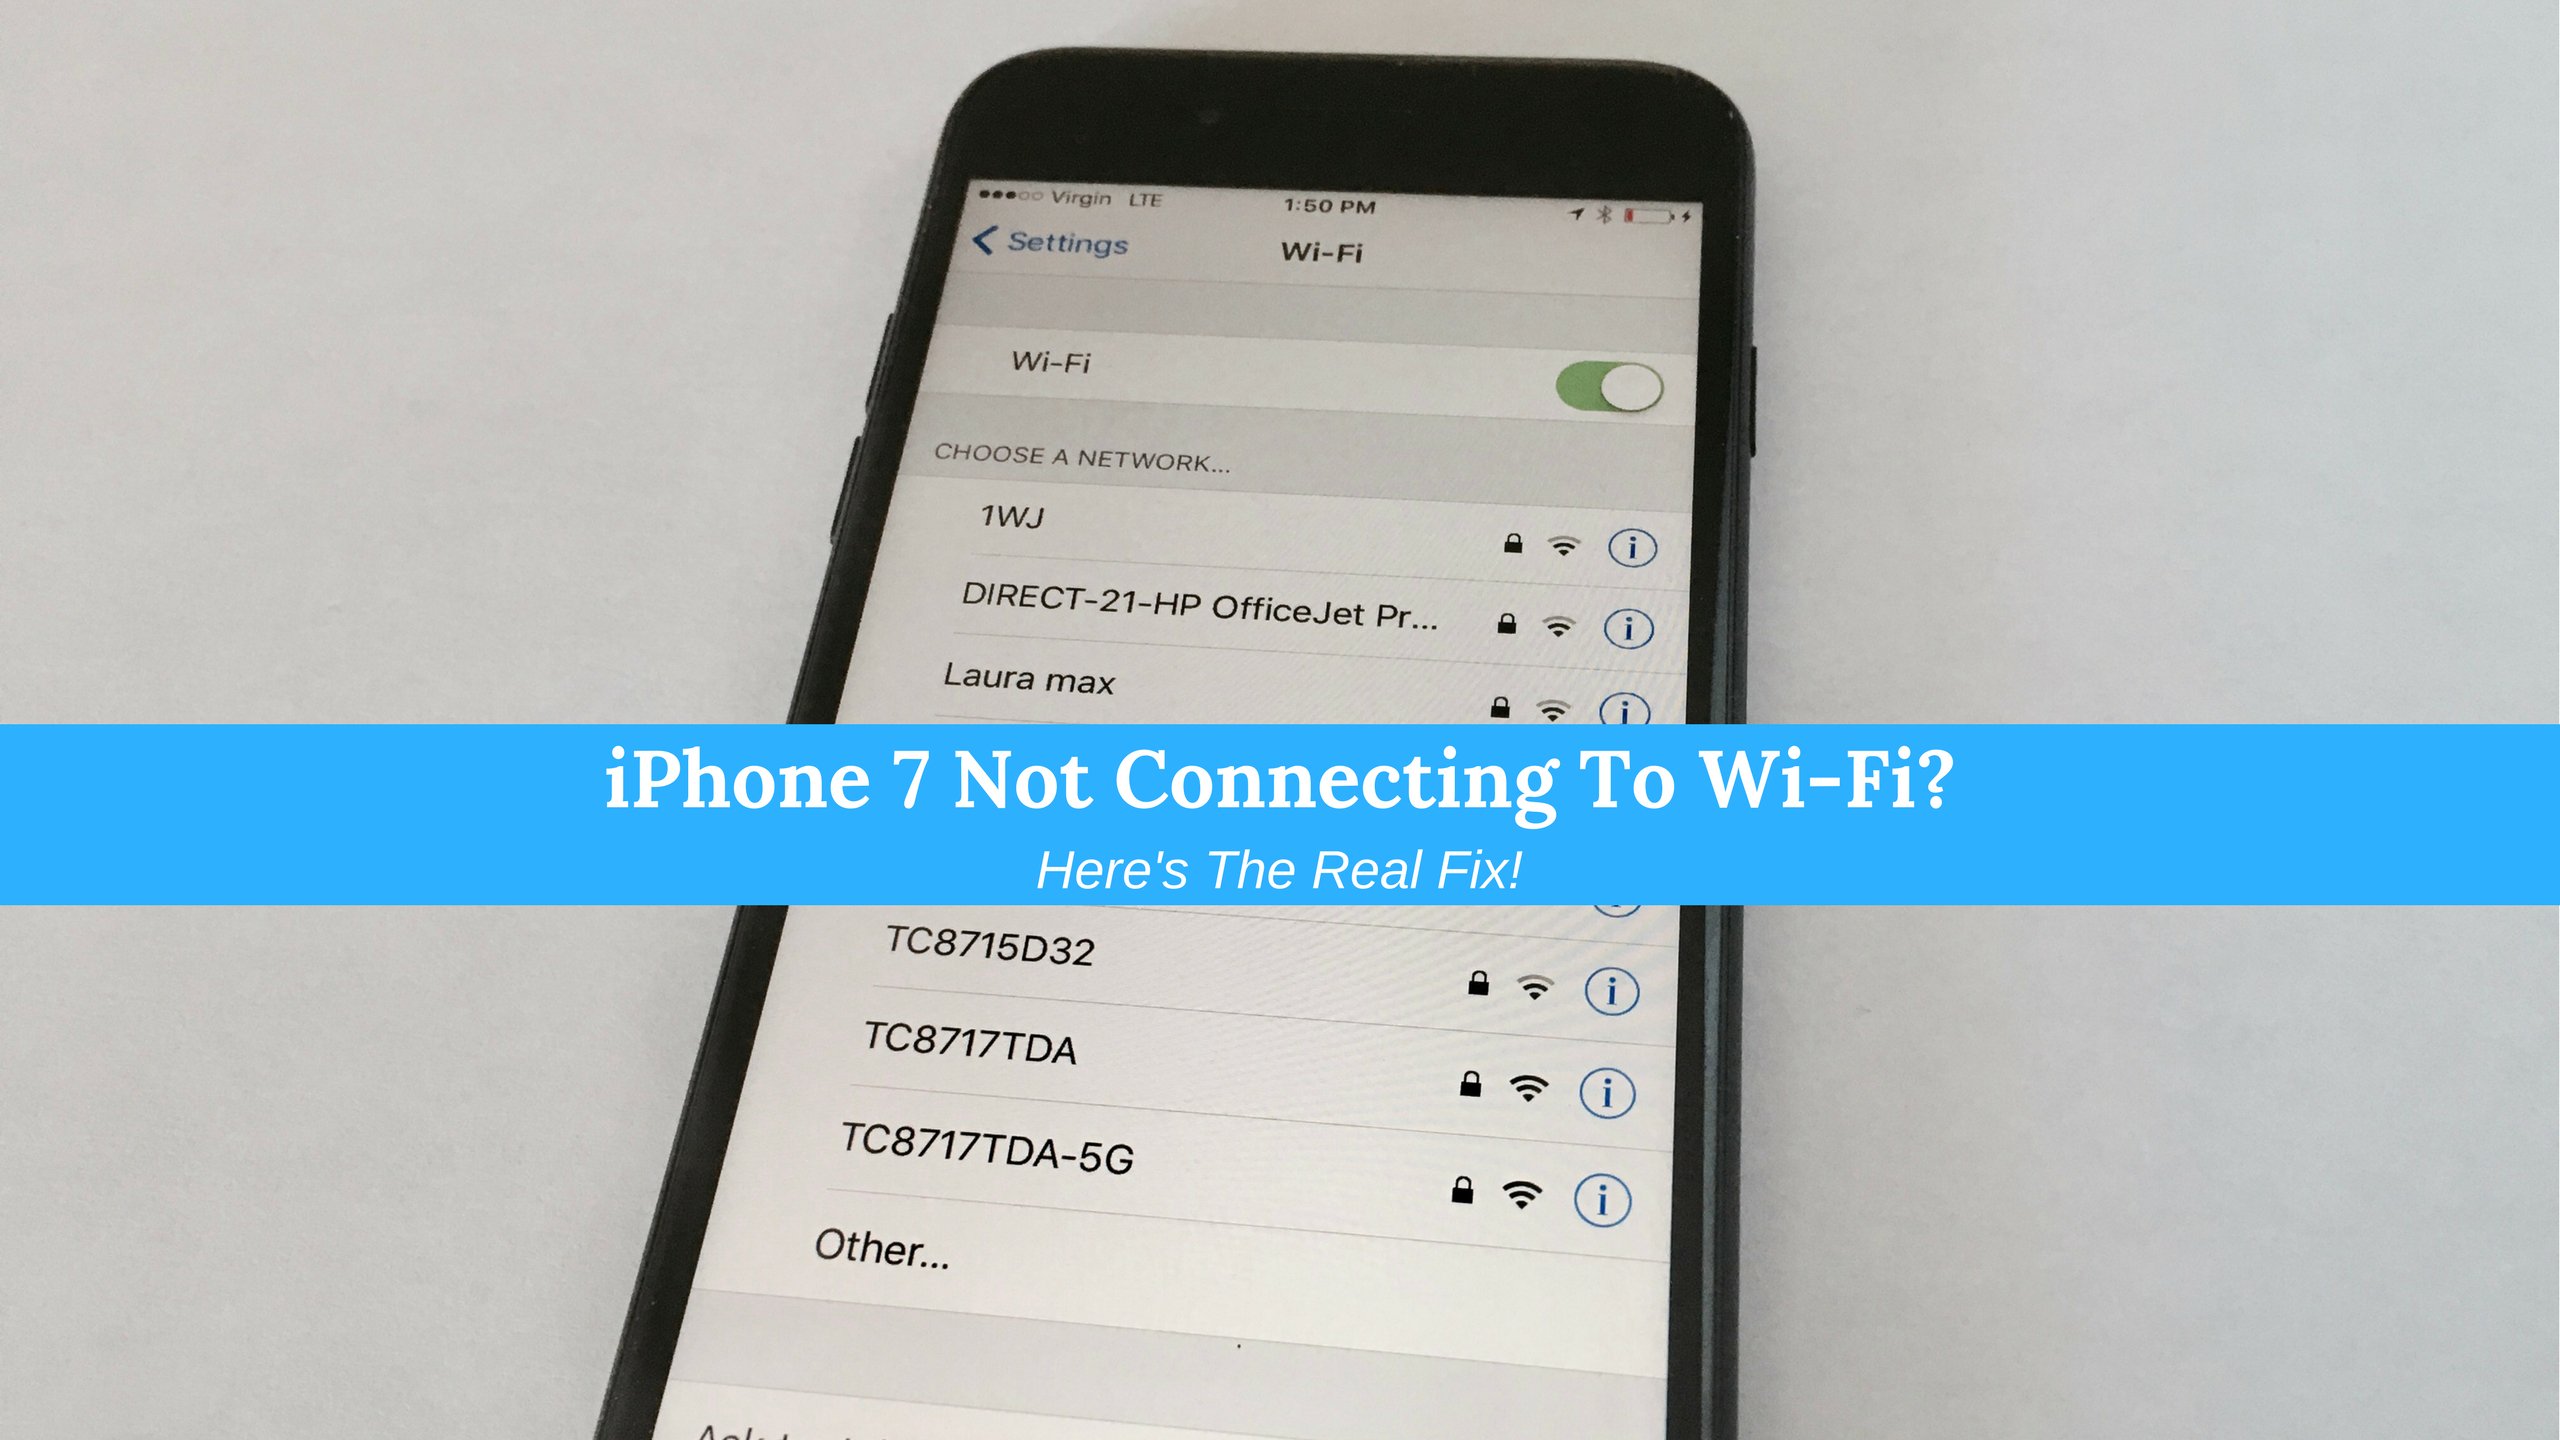 iPhone 7 Not Connecting To WiFi? Here's The Real Fix!